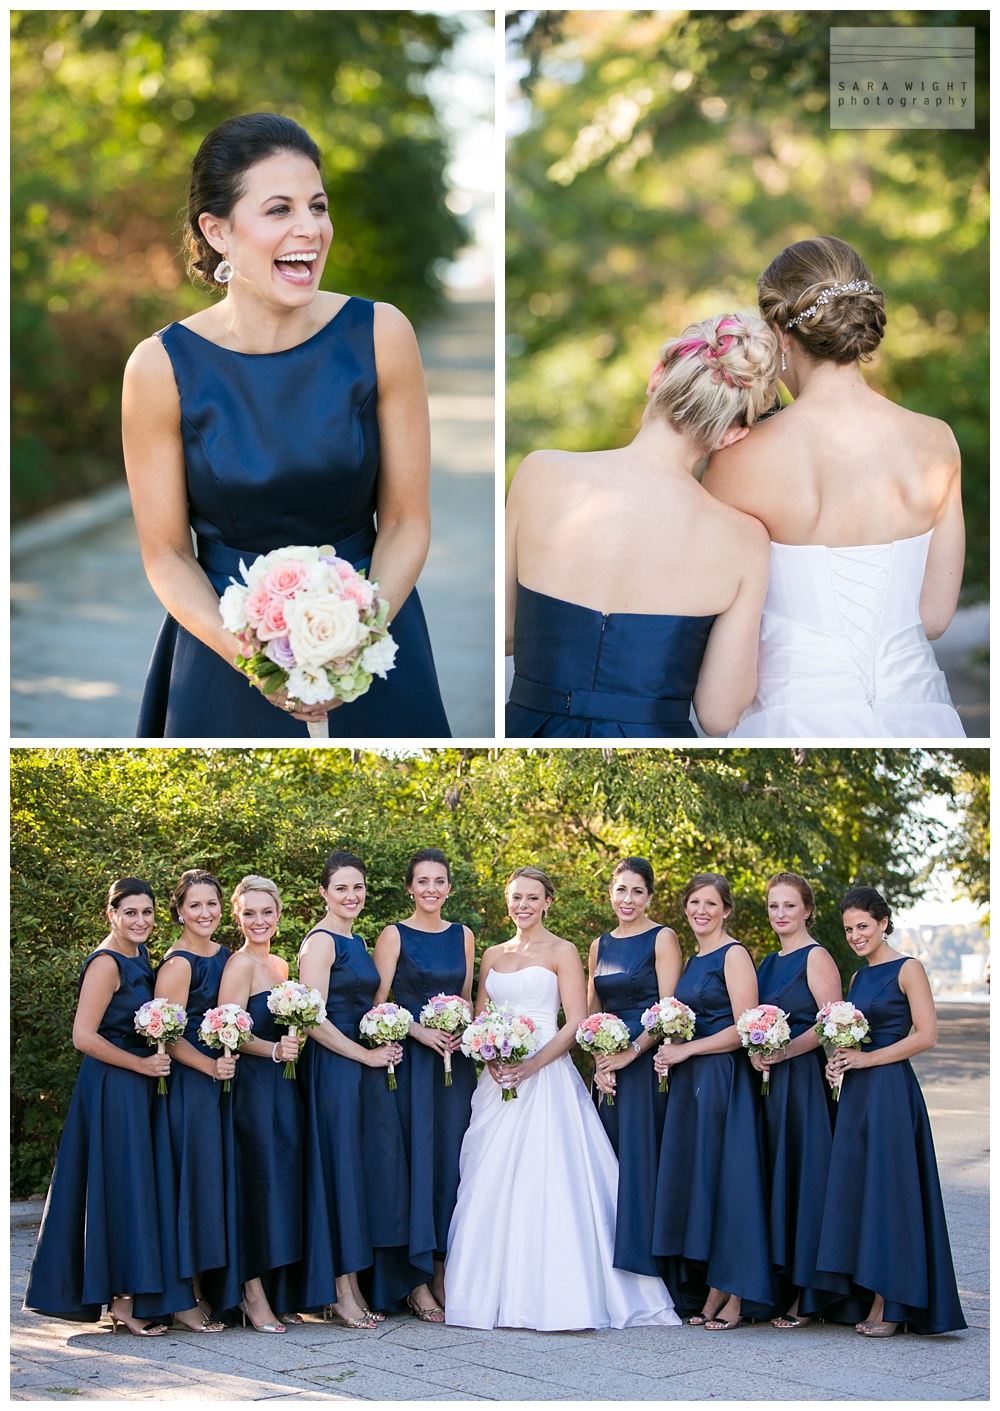 Lighthouse at Chelsea Piers Wedding, Sara Wight Photography_0009